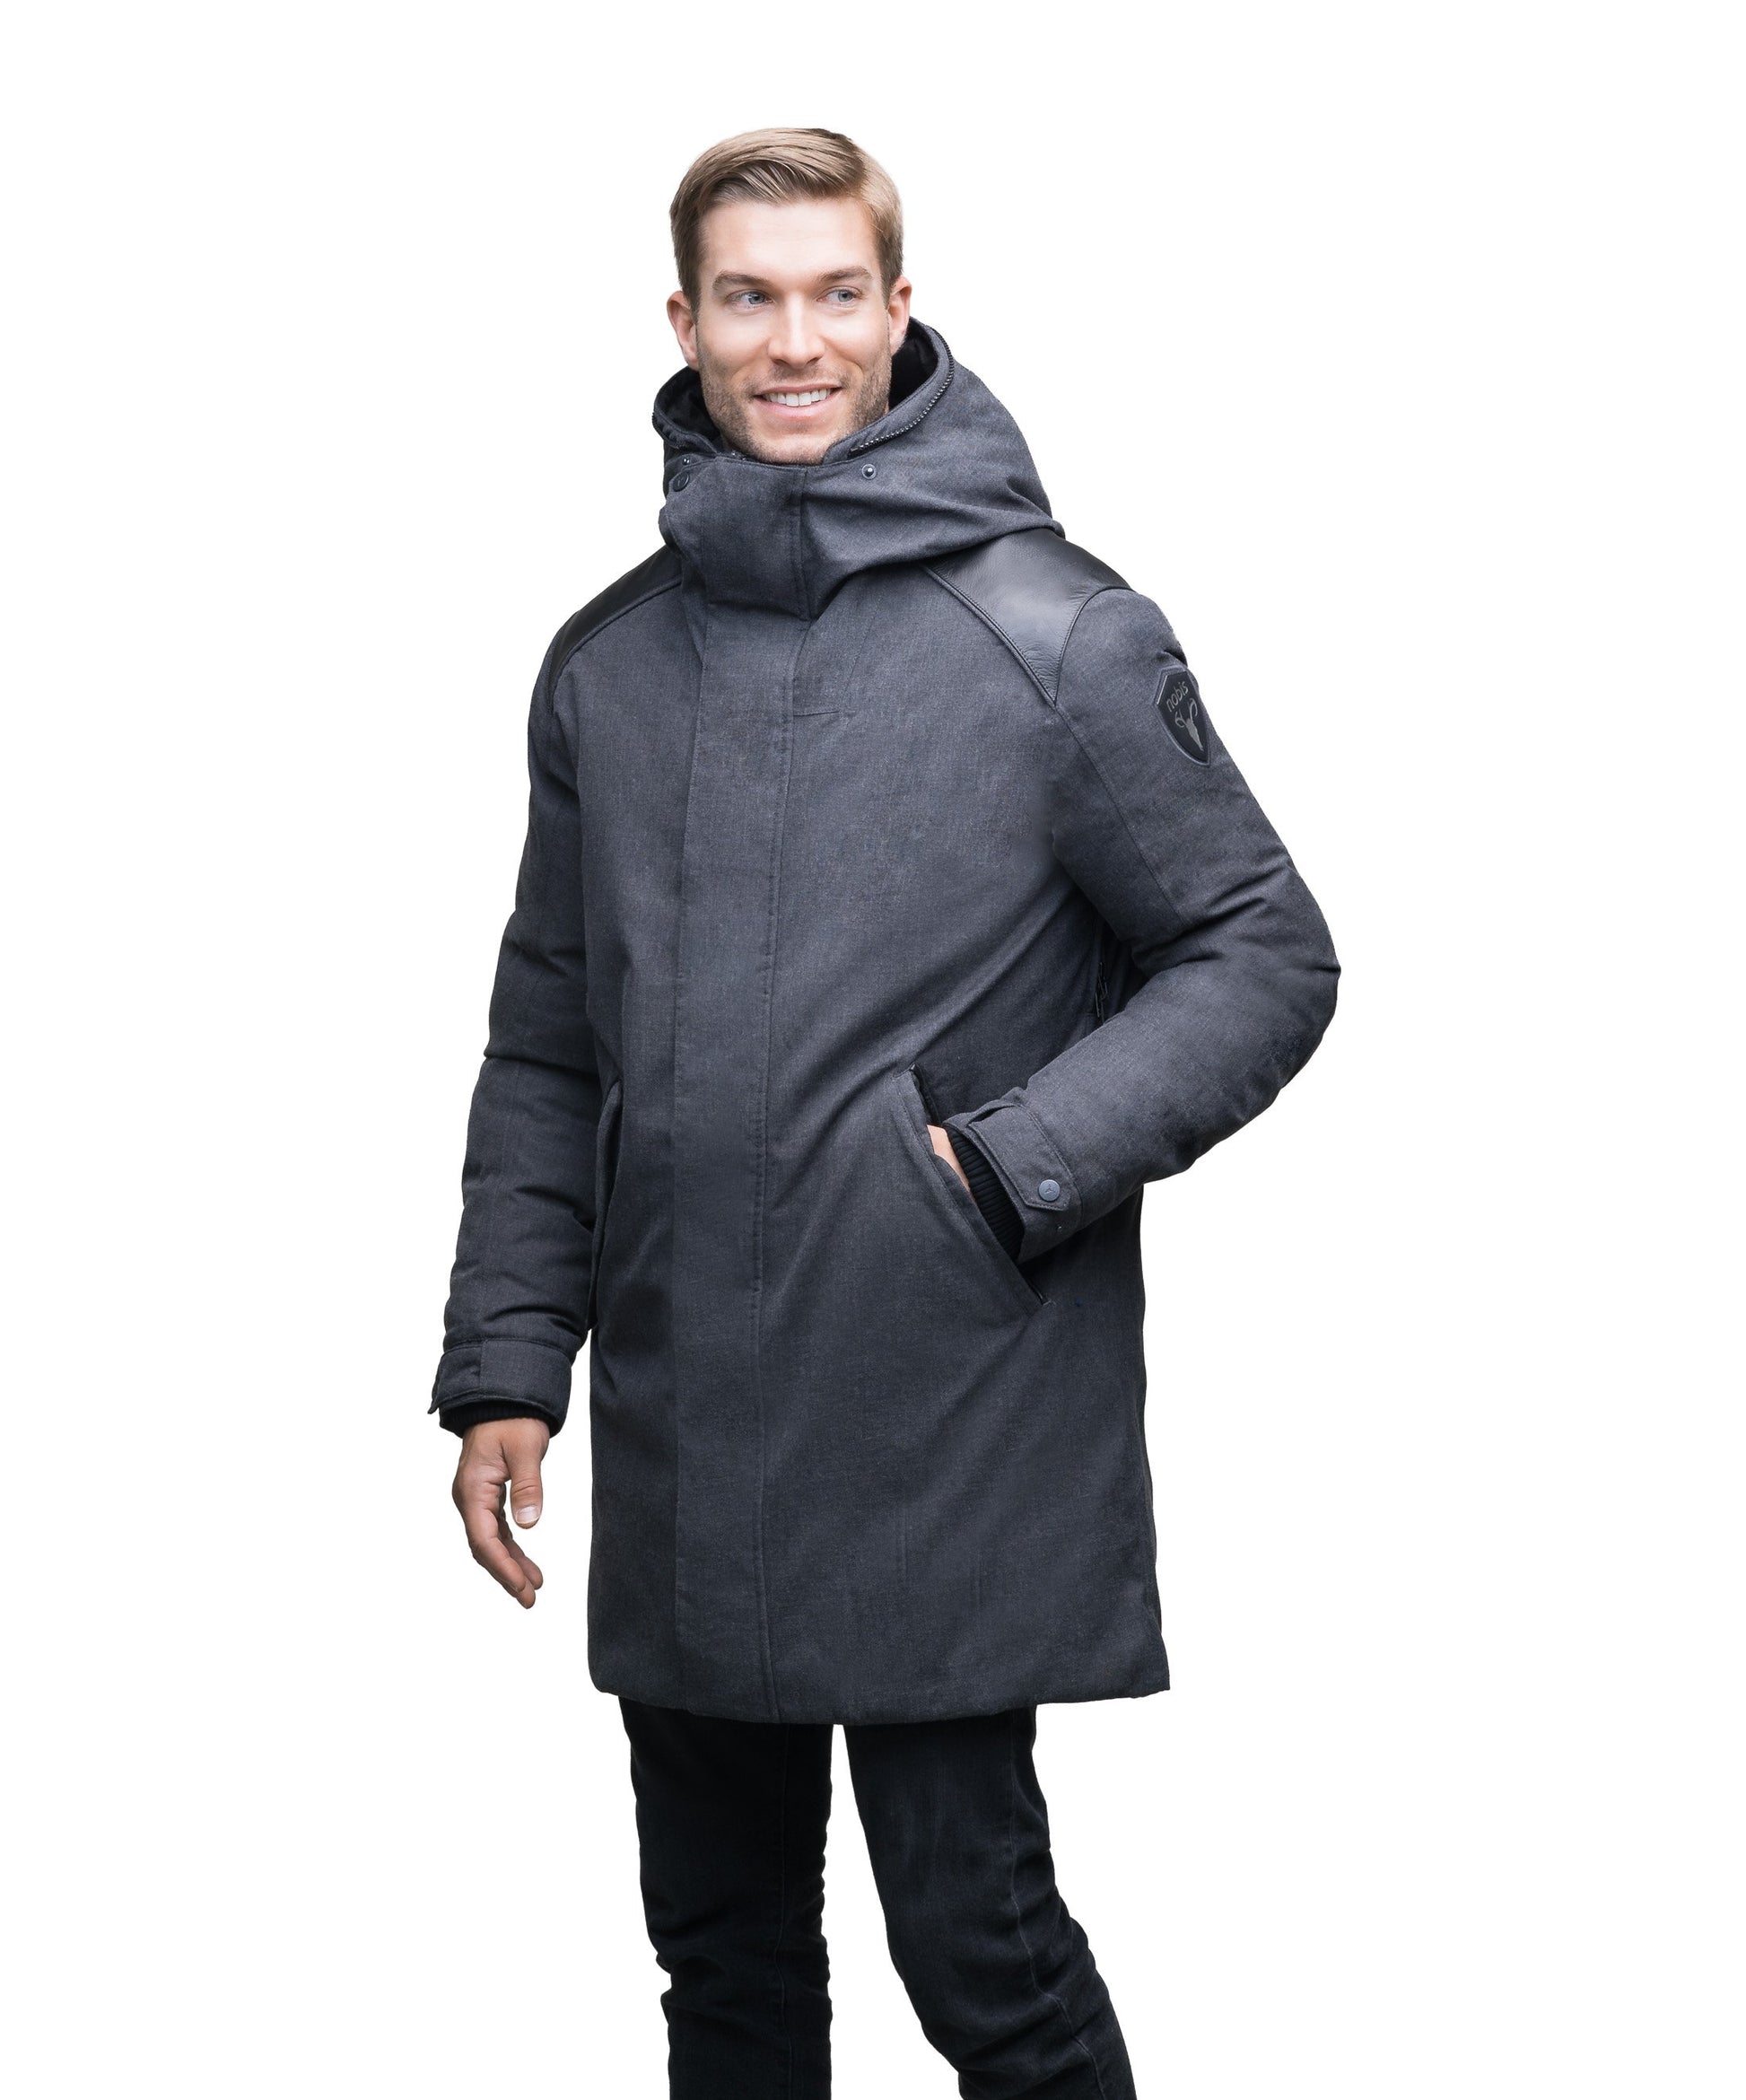 Men's down filled overcoat with premium washable Japanese DWR leather on both shoulders in H. Charcoal or H Black